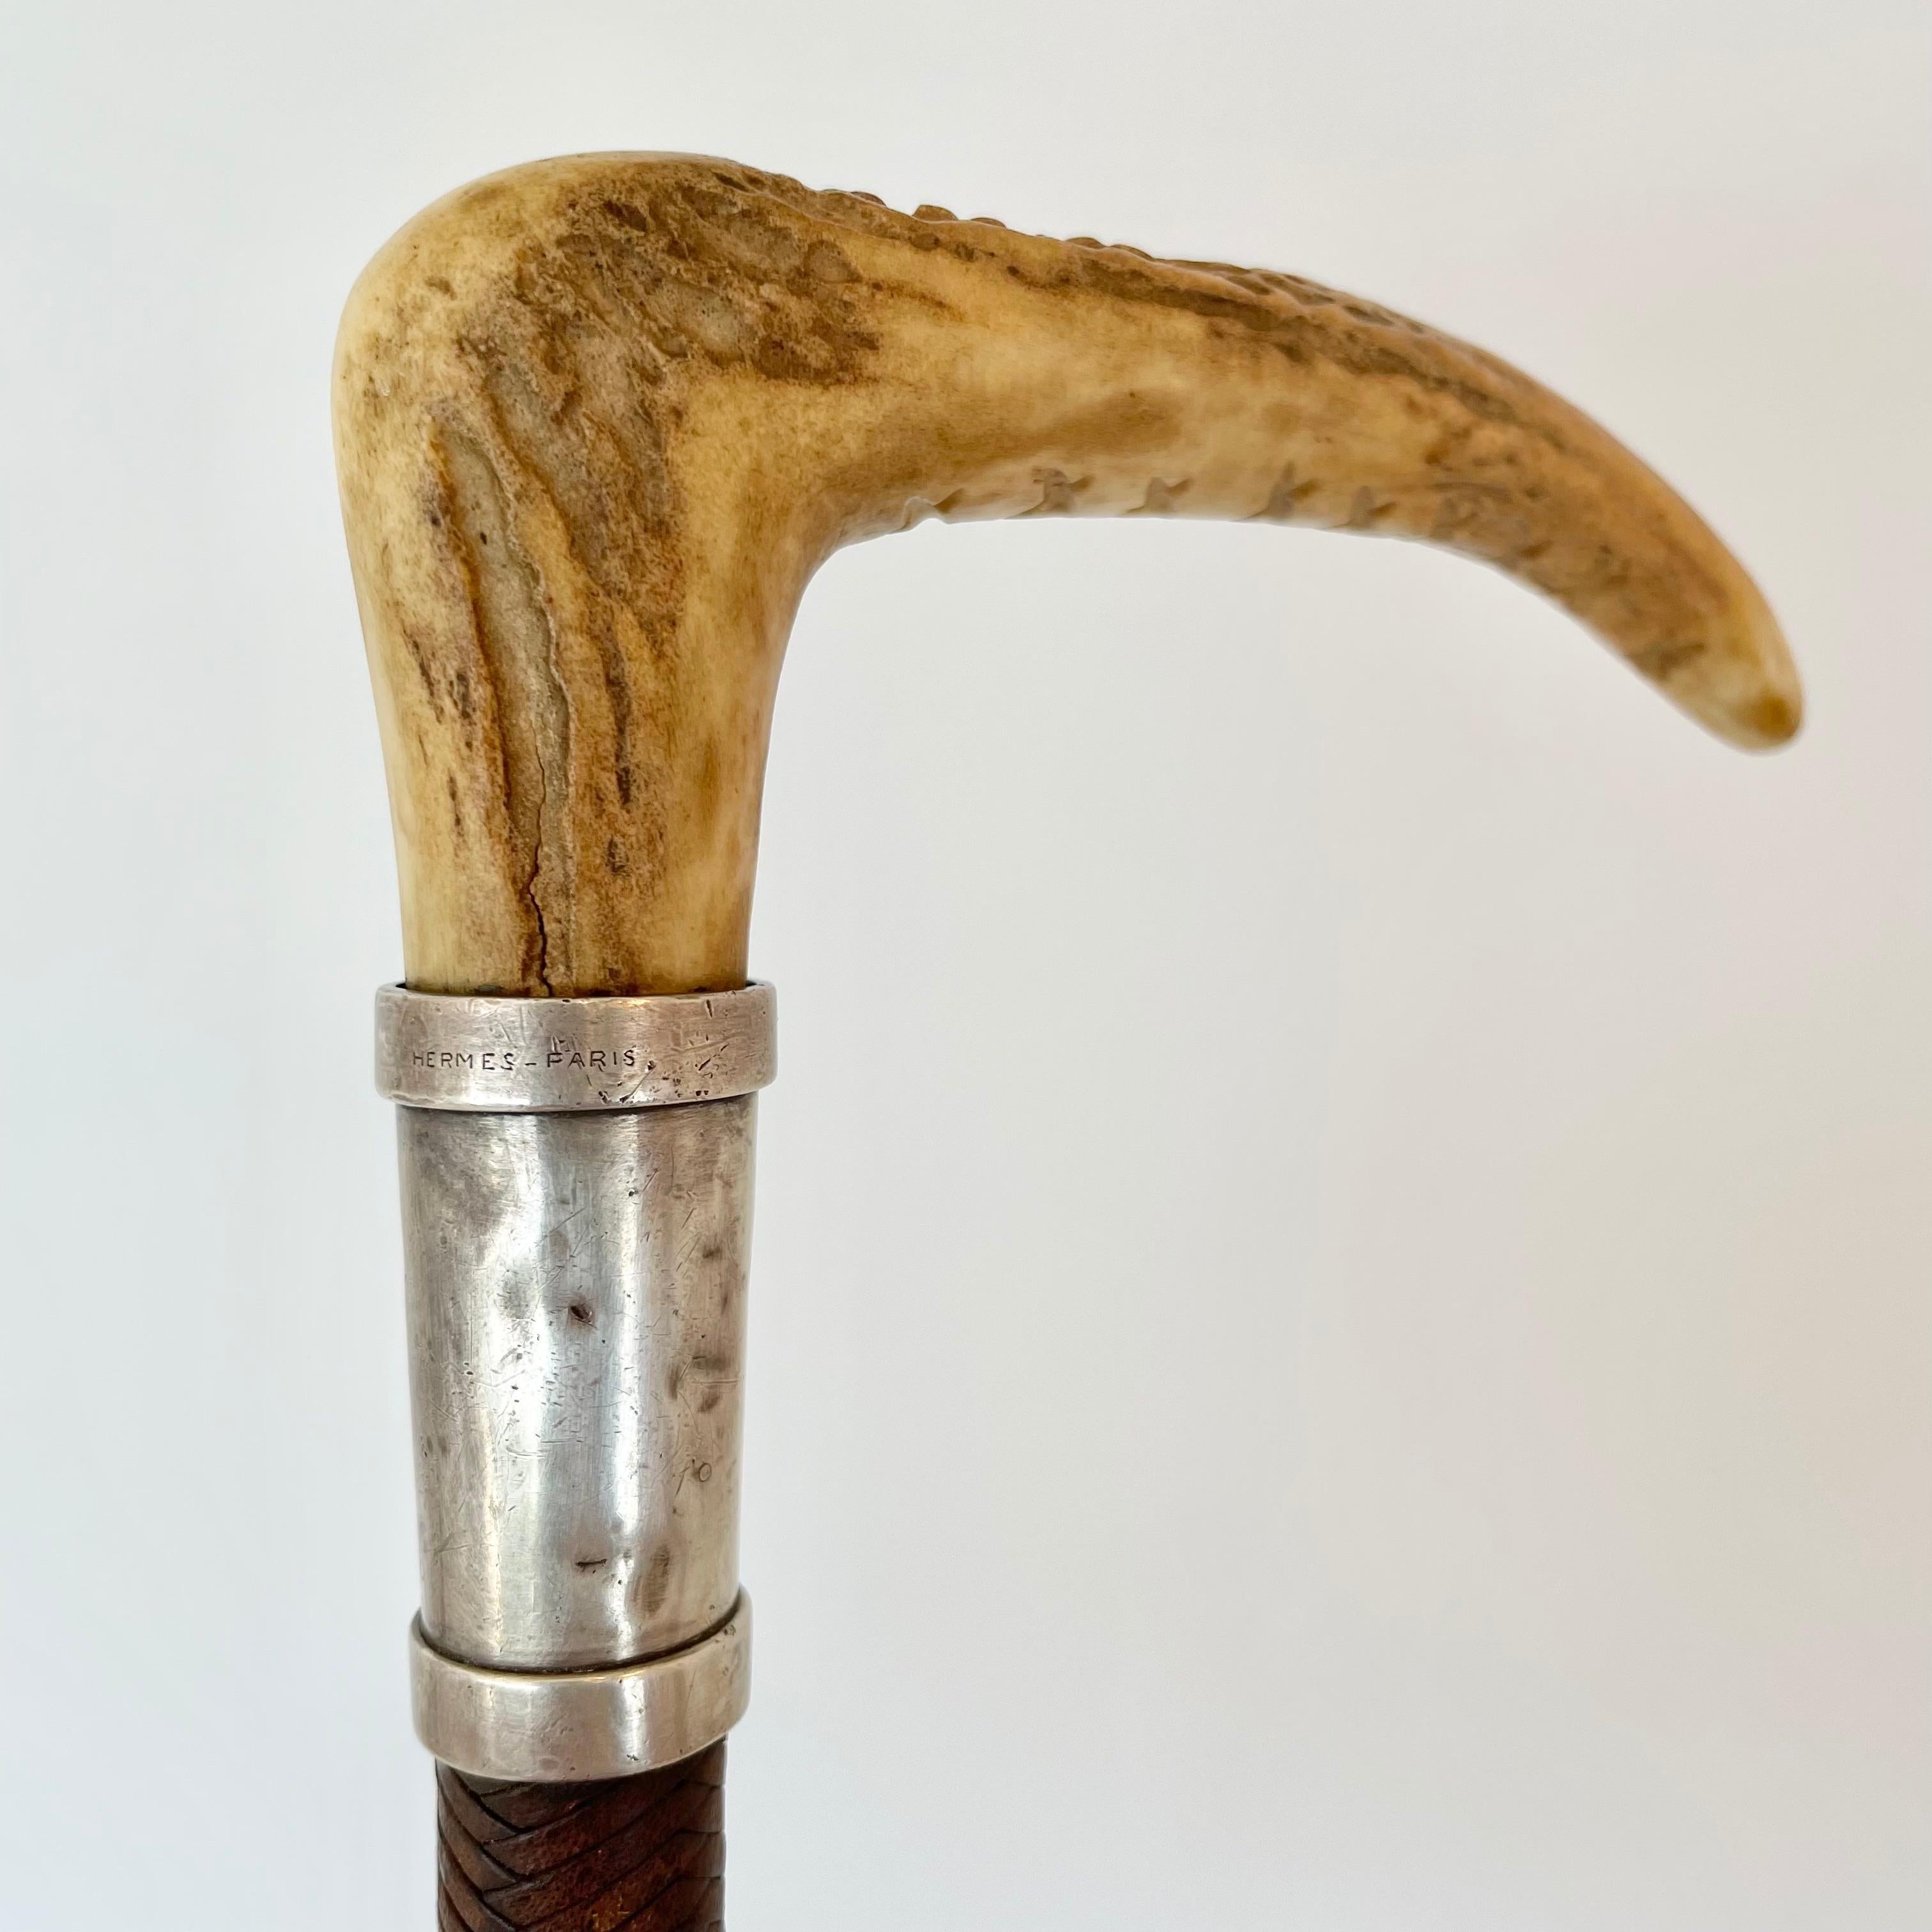 Vintage Hermes riding crop with deer antler handle. The shaft is covered in a beautifully braided leather and finished at the bottom with twine. The stag antler is fastened at the top with a silver plated collar bearing the Hermes Paris engravings